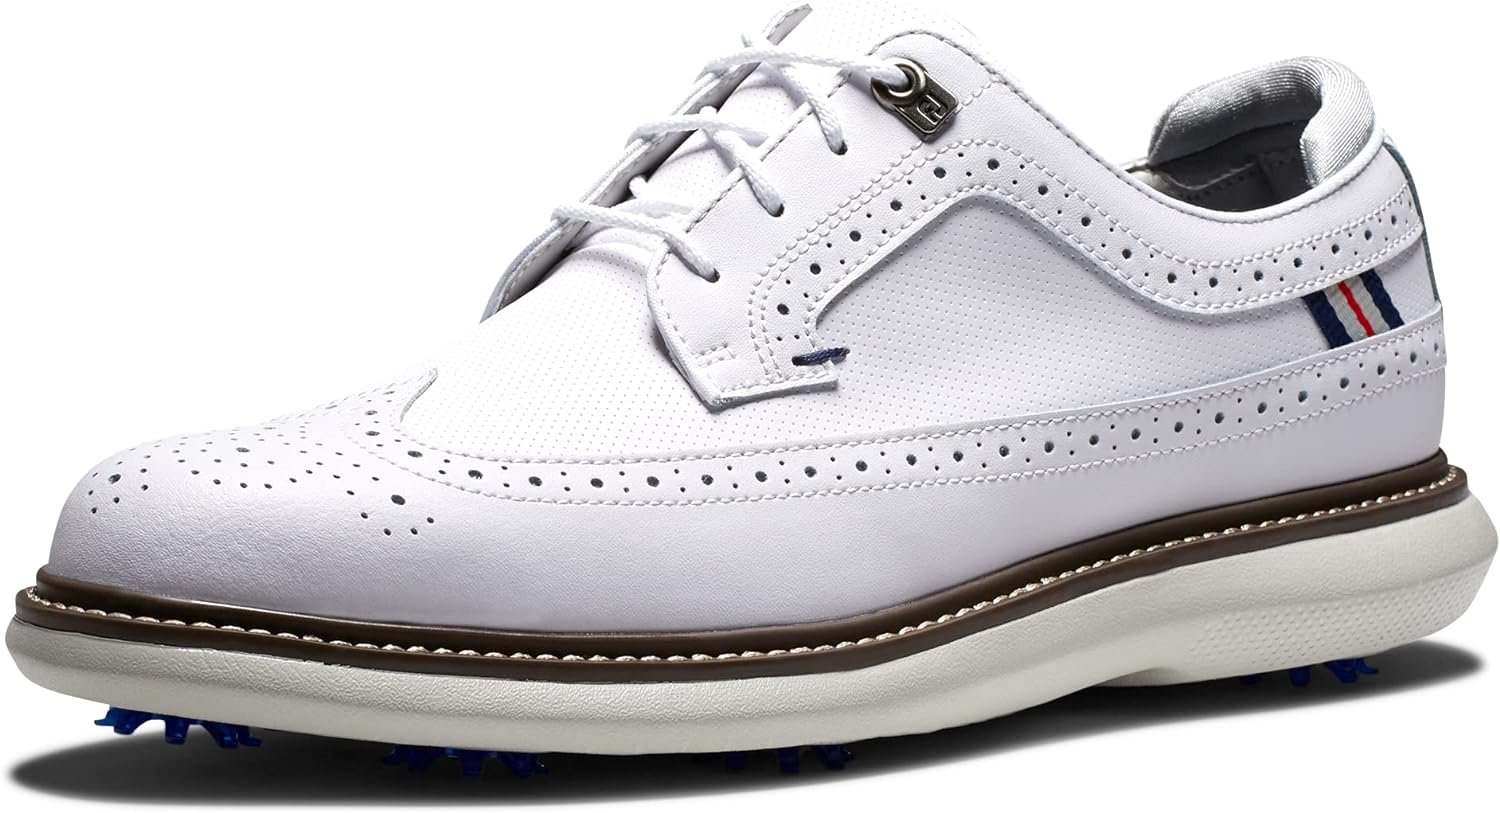 FootJoy Mens Traditions-Wing Tip Golf Shoe